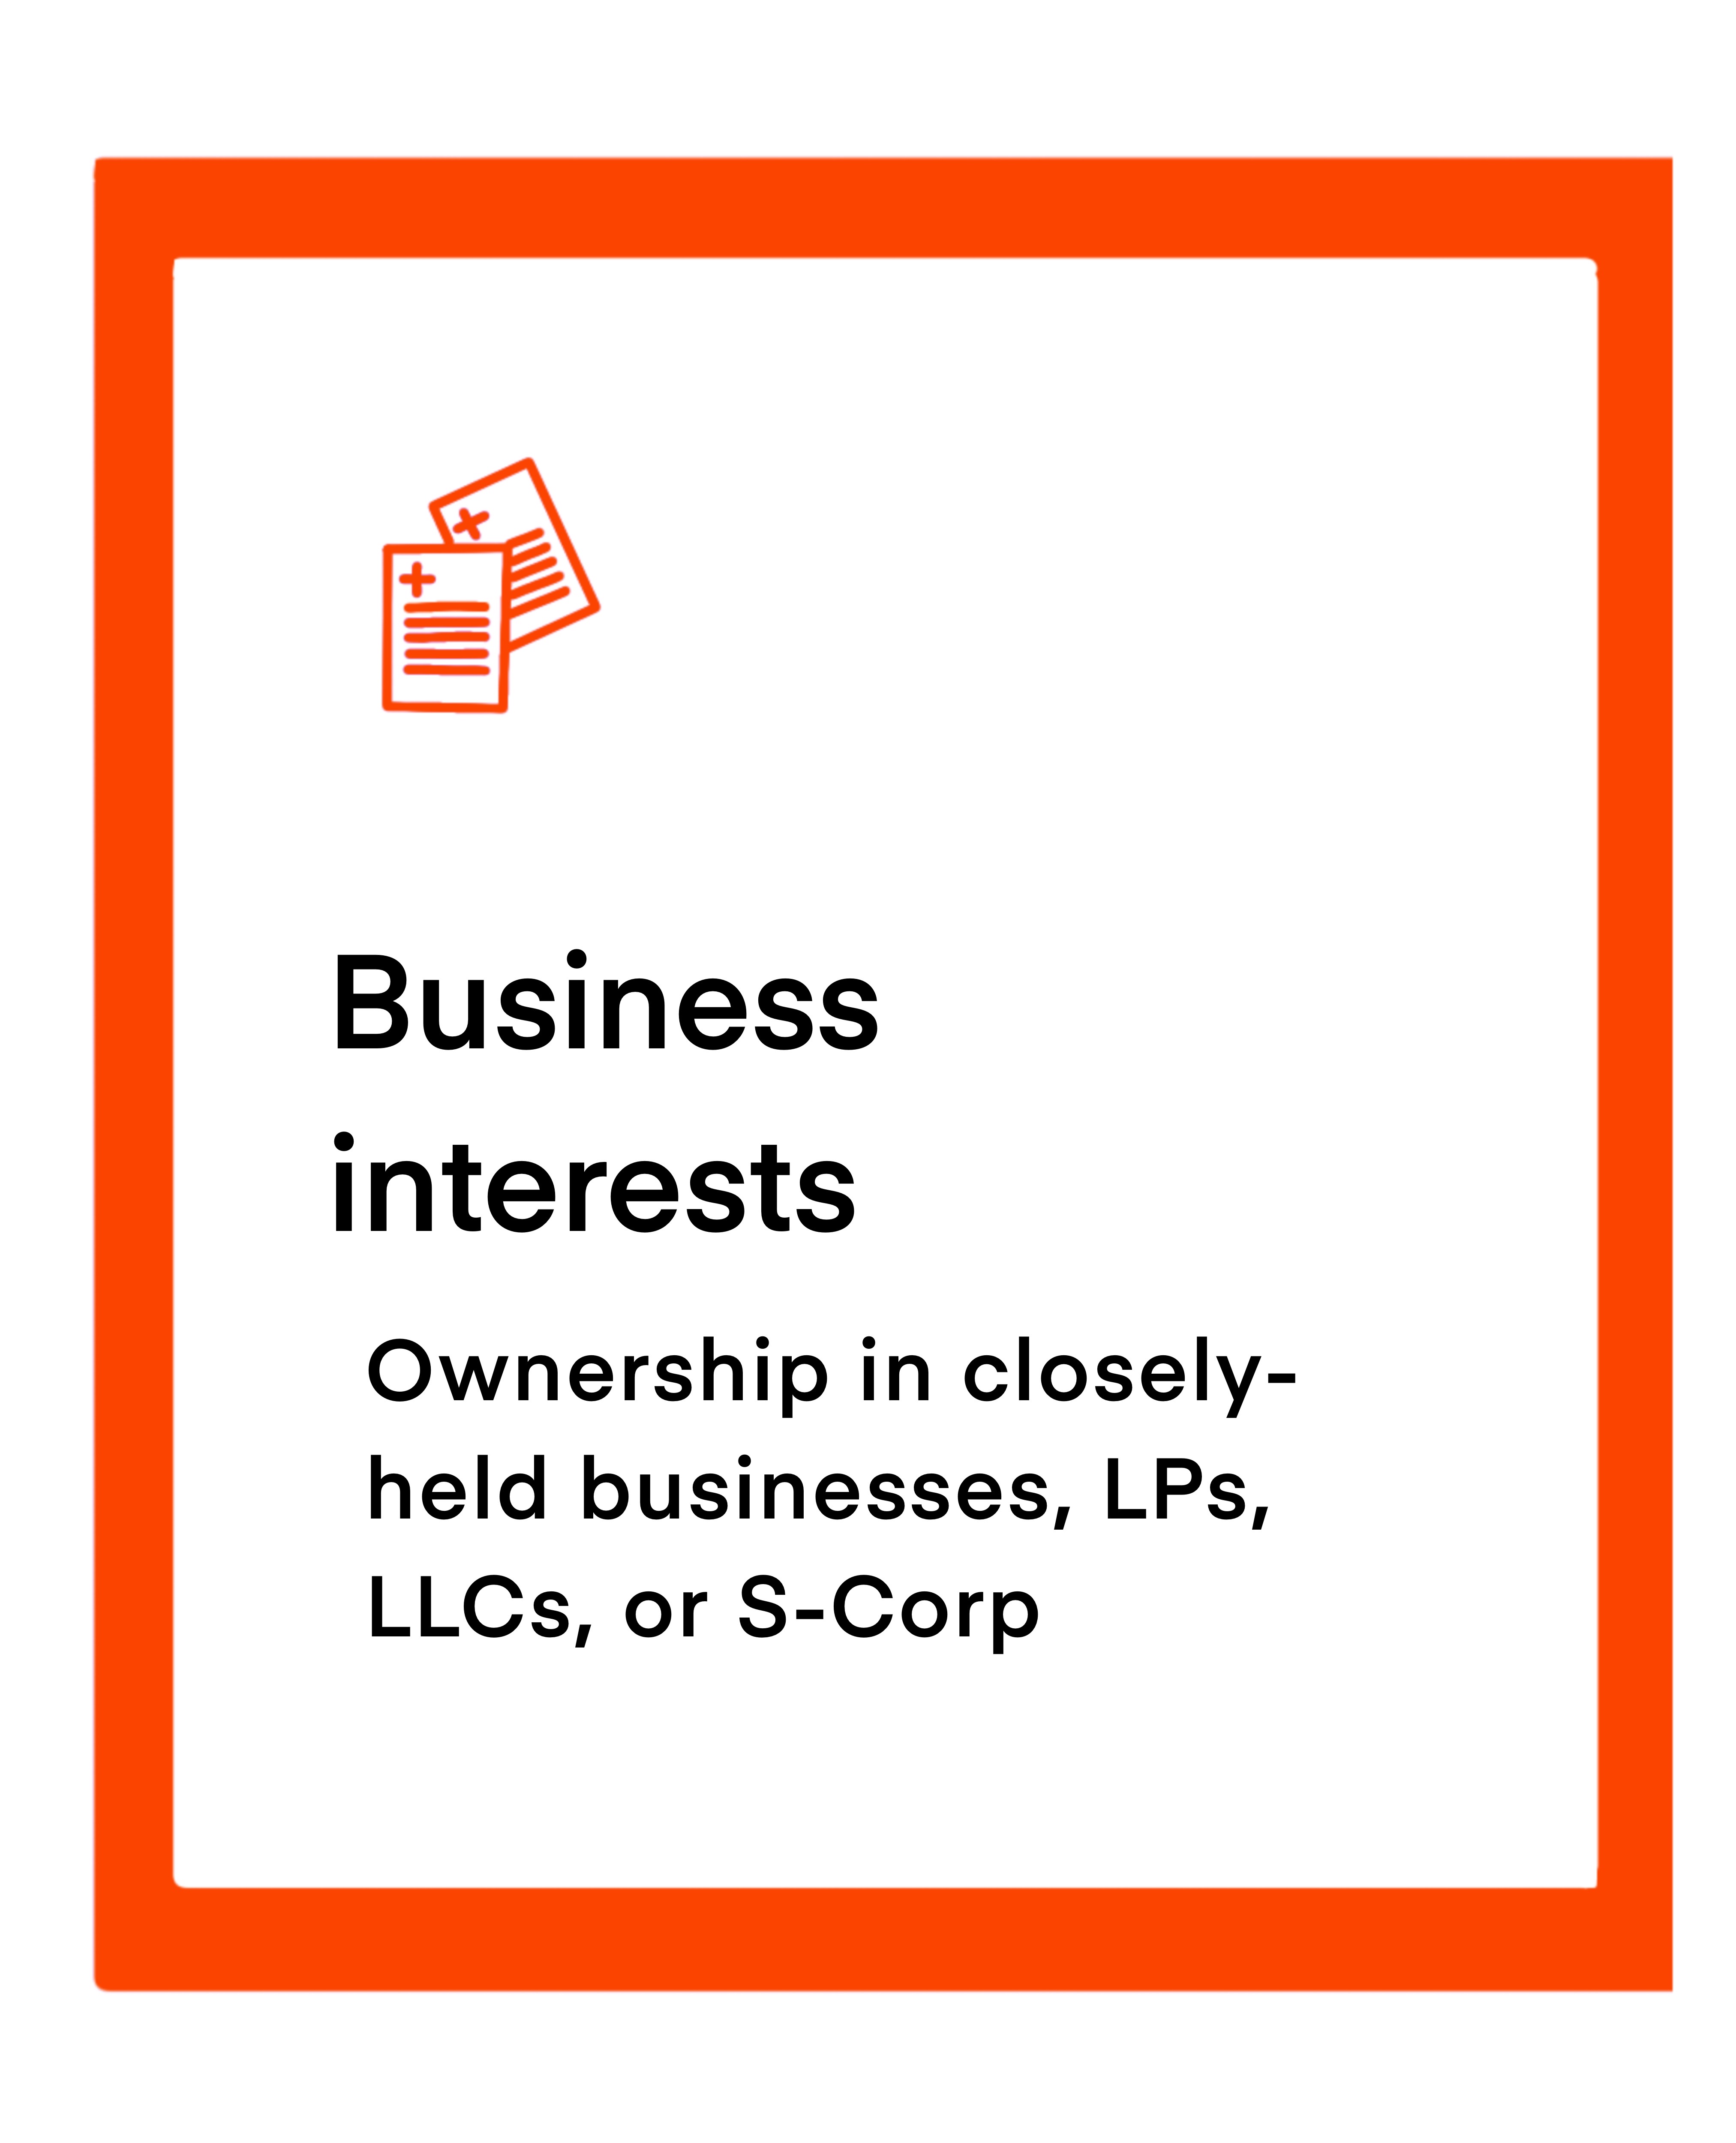 Business interests